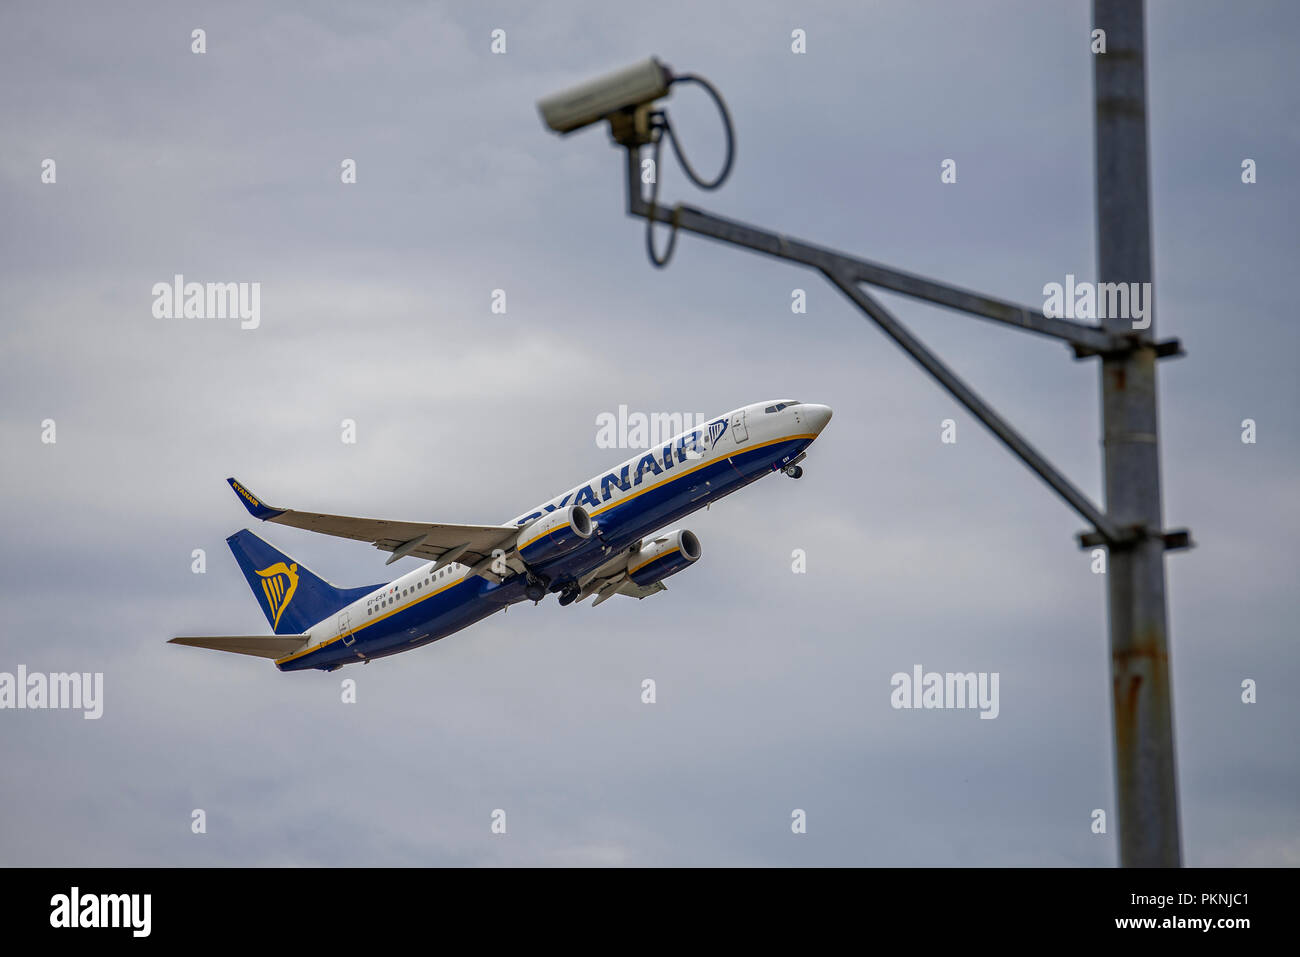 Airplane of Ryanair (EI-ESV) at the start at Frankfurt airport with security camera in the foreground Stock Photo